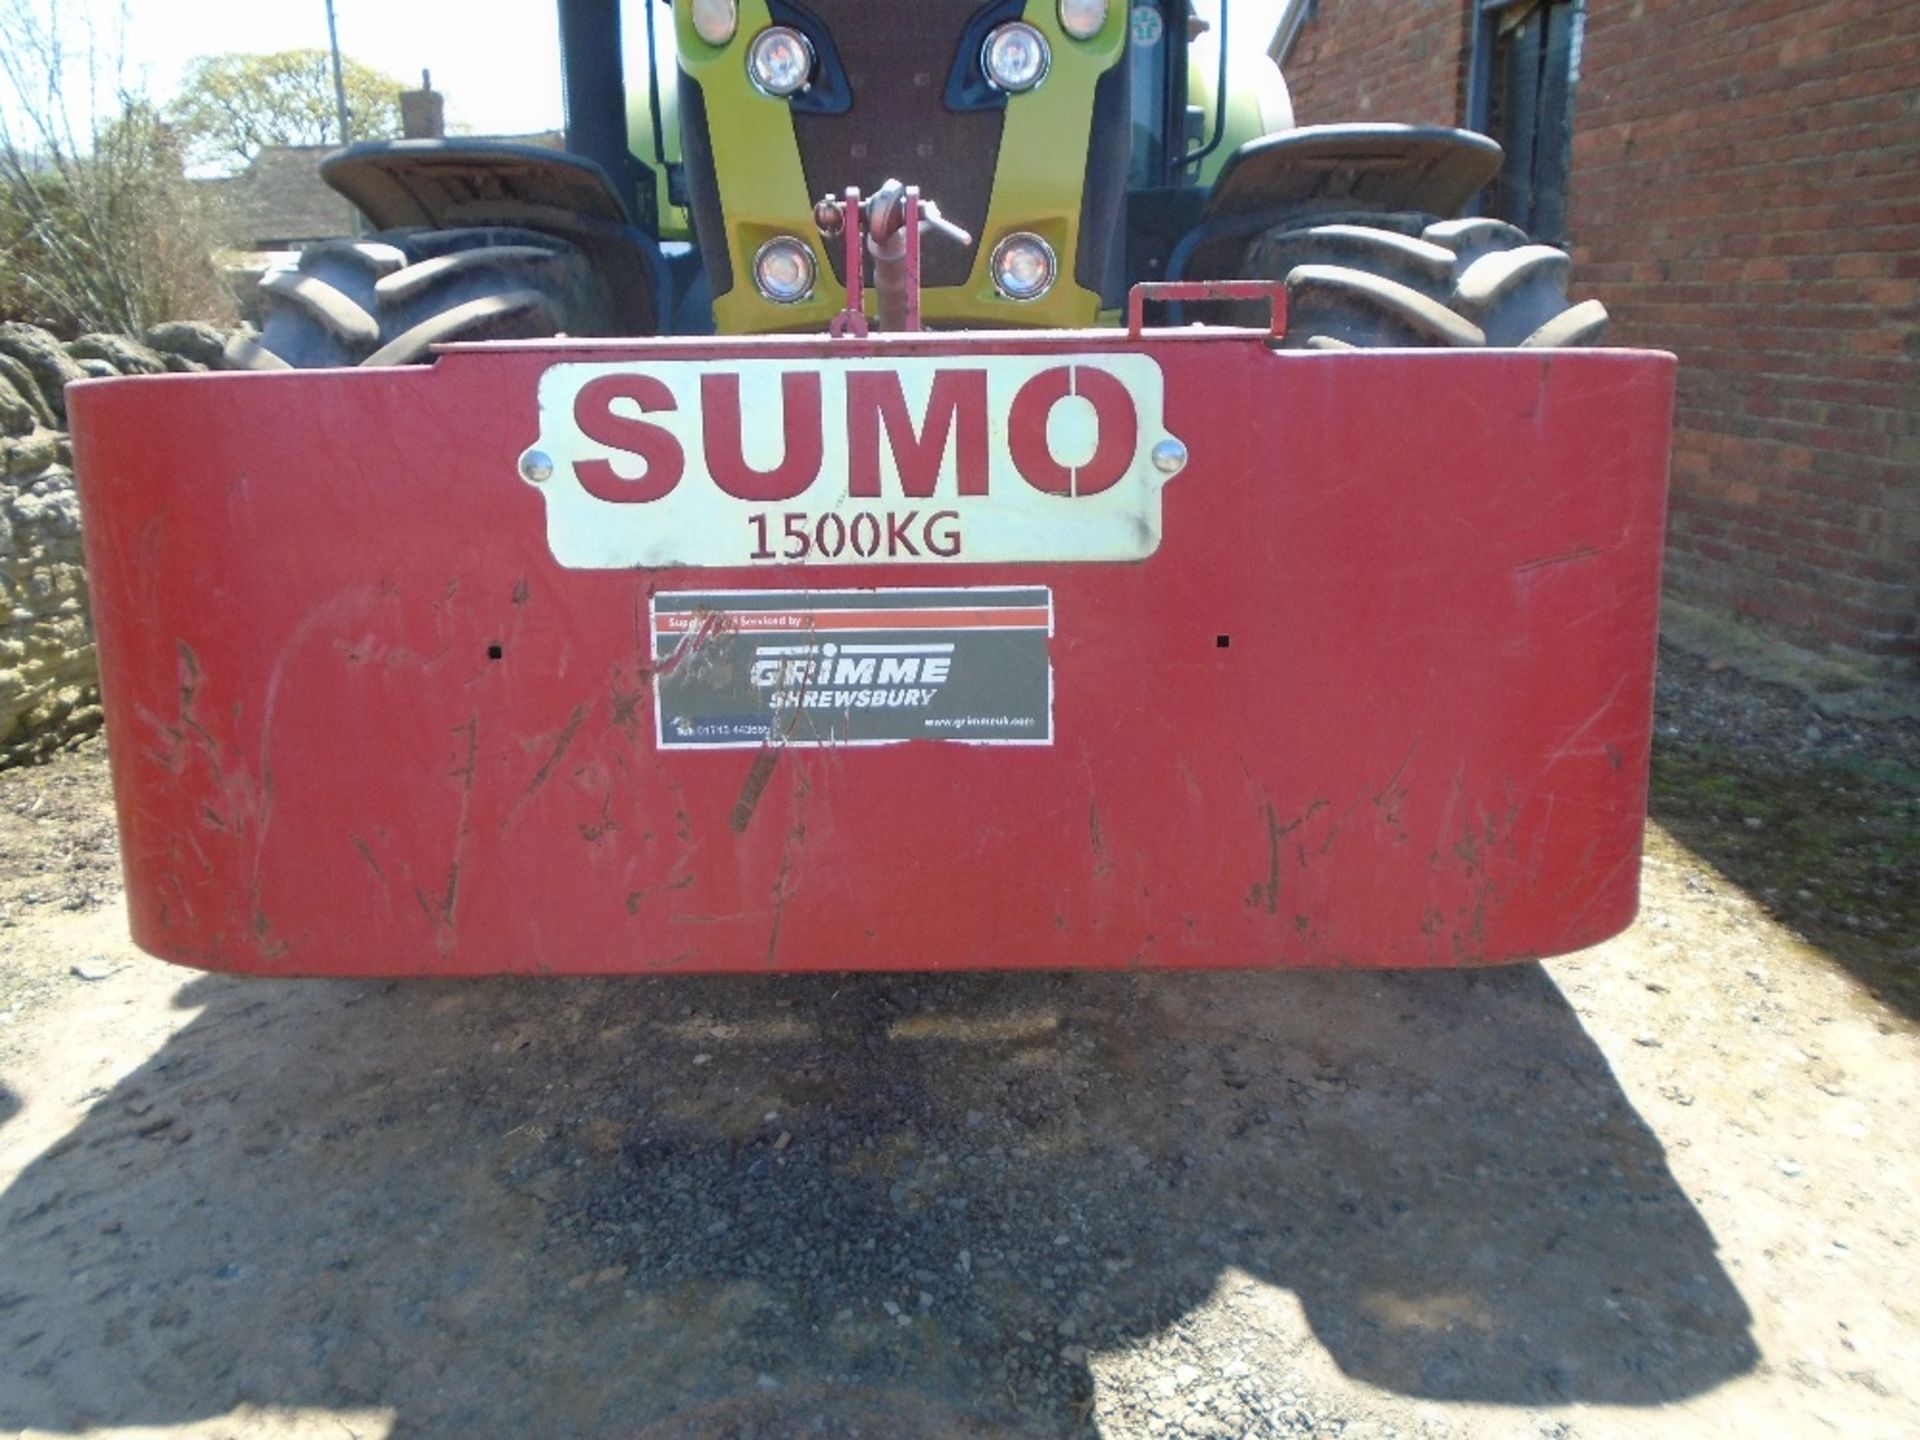 SUMO 1500KG LINKAGE WEIGHT ( APPROX) 5 YEARS OLD ) - Image 2 of 2